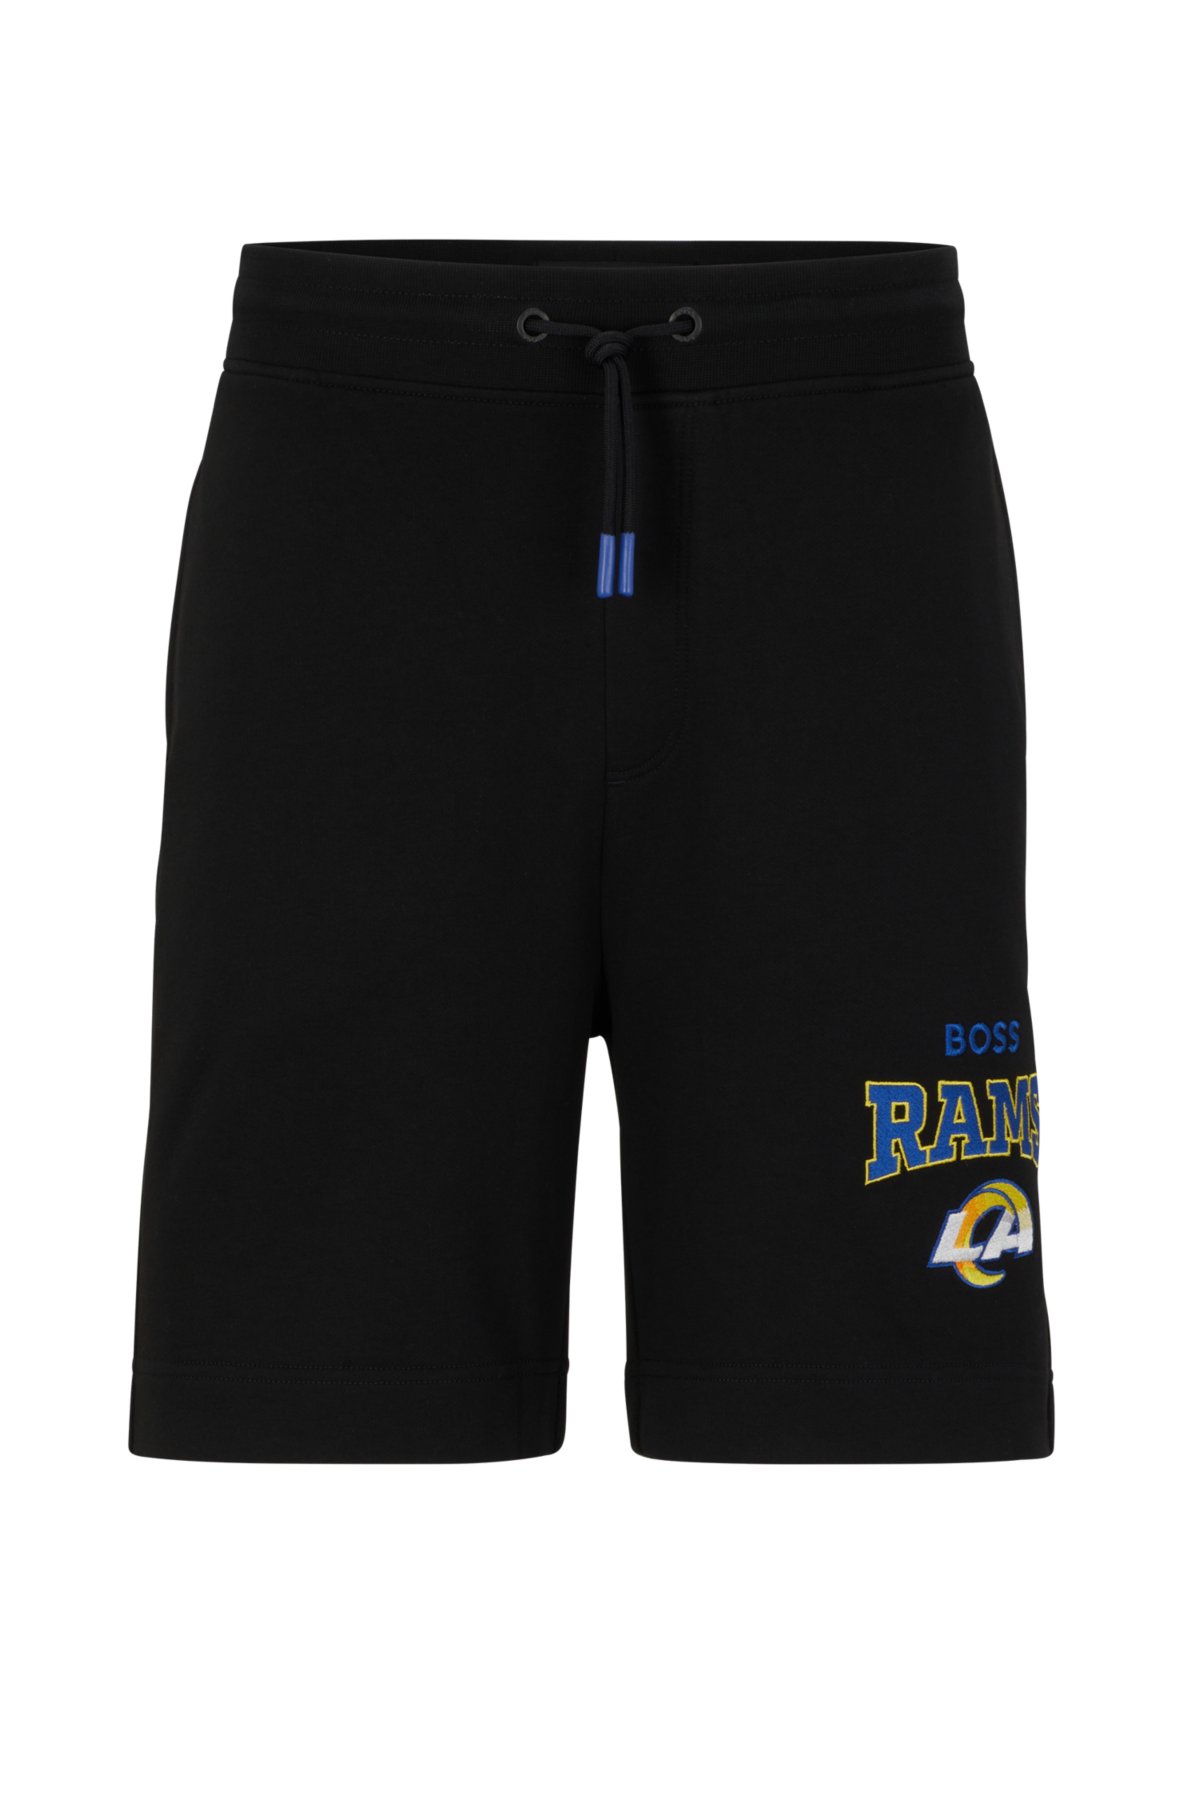 BOSS x NFL cotton-terry shorts with collaborative branding, Rams